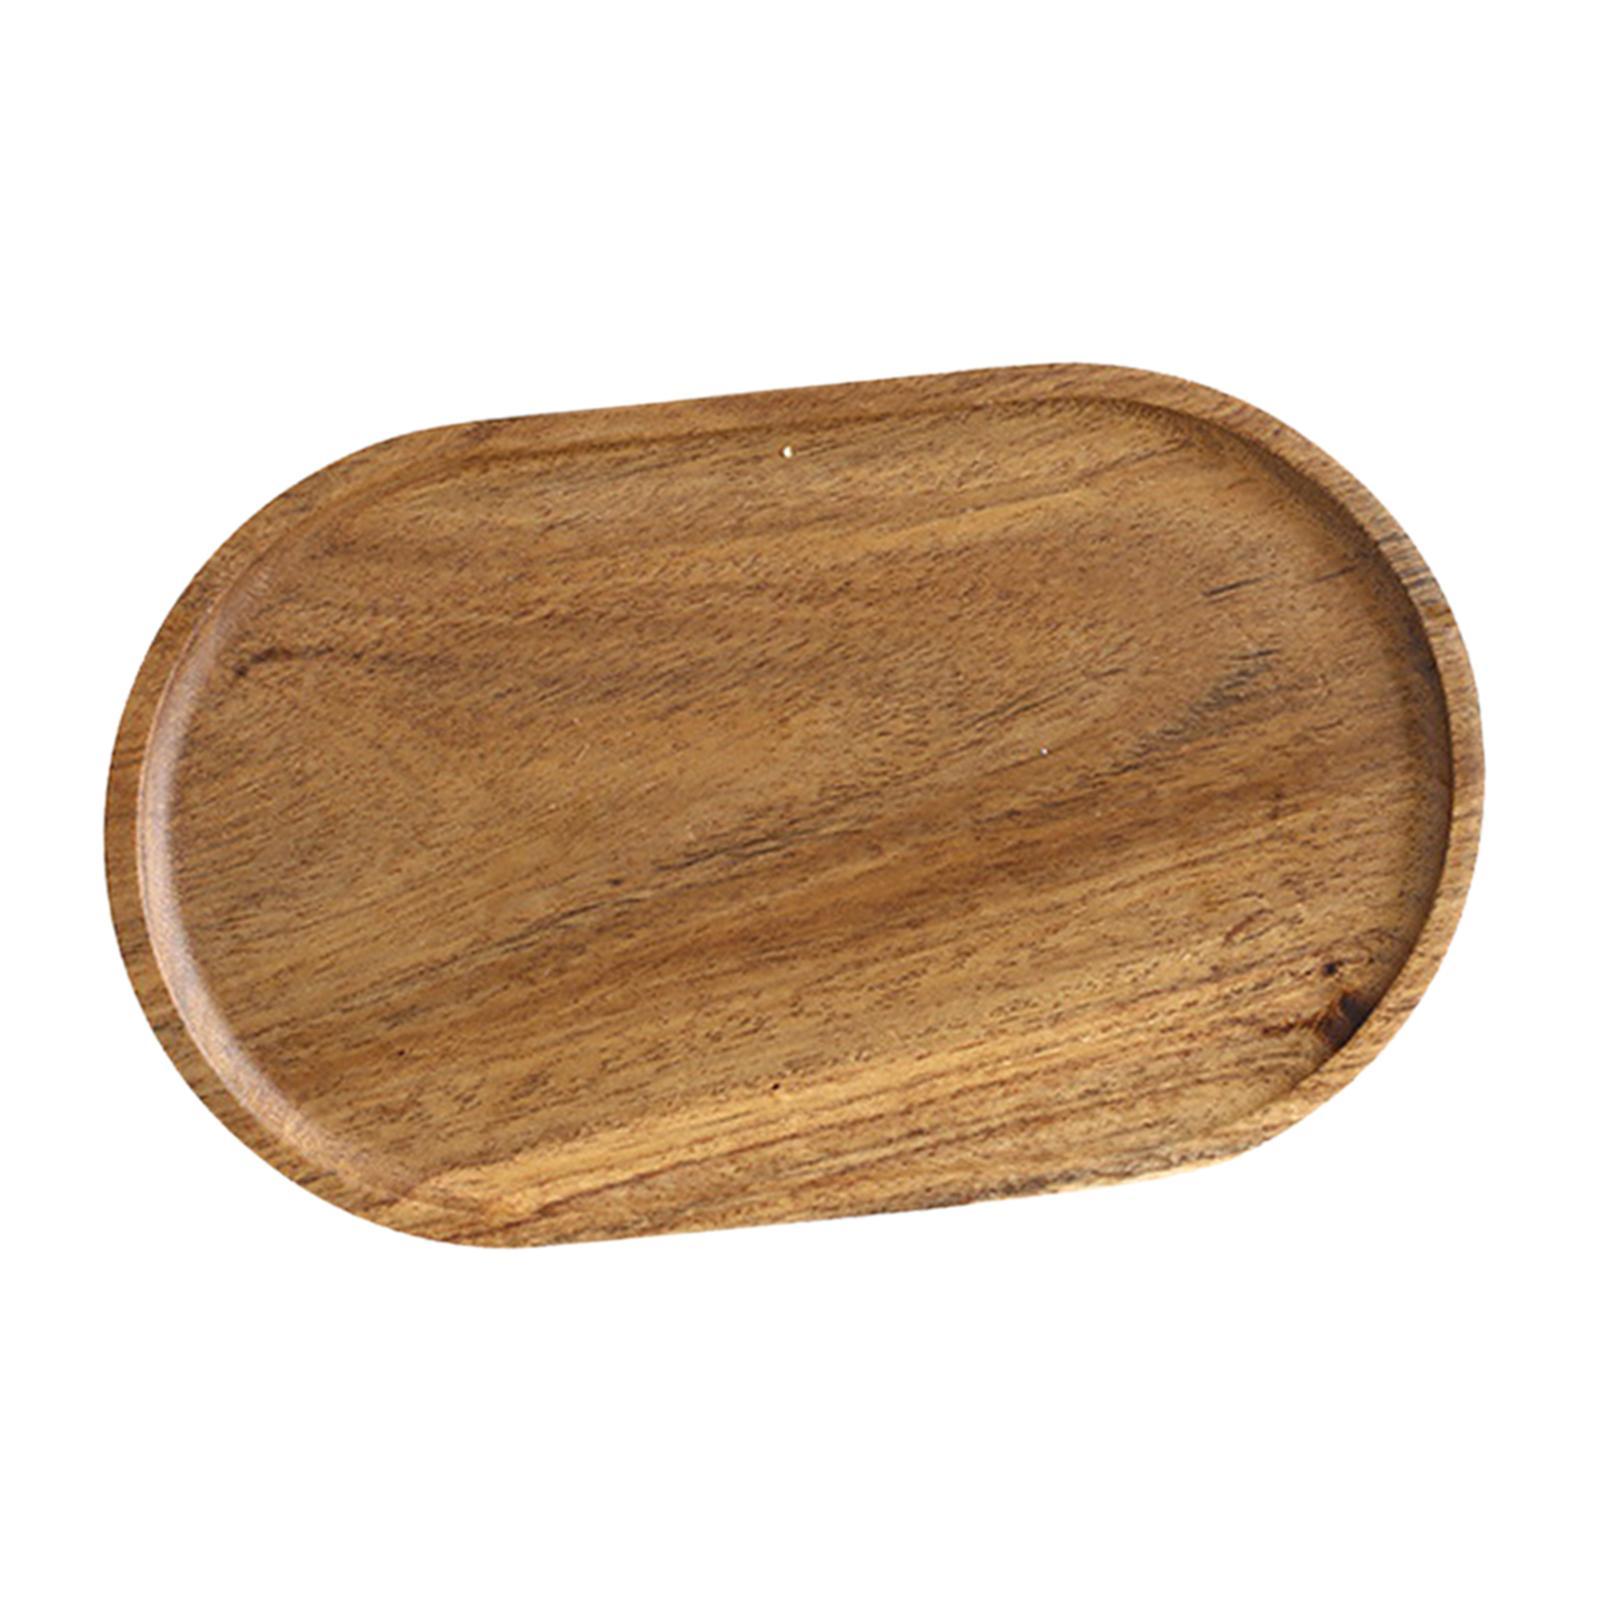 Serving Plate Cheese Platter Wood Tray Food Dish for Dessert Sandwich Snacks